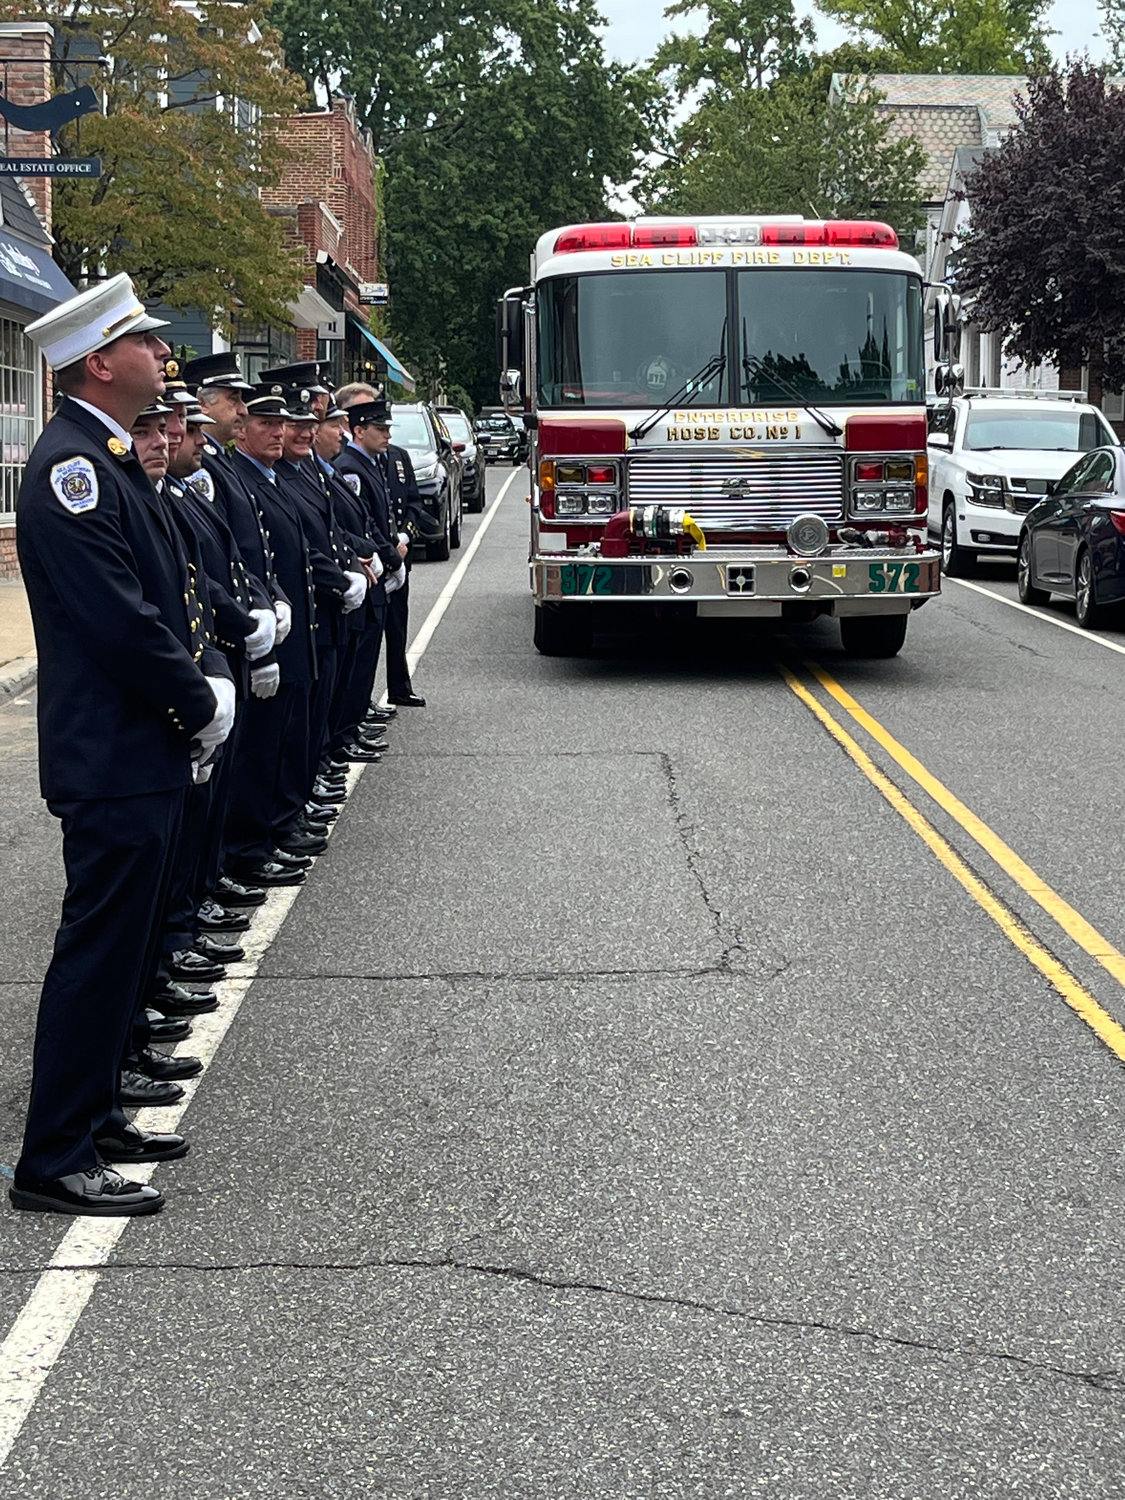 Members of the Sea Cliff Fire Department proudly stood by their company firetruck, highlighting the heroic efforts and sacrifices of first responders following the attacks.